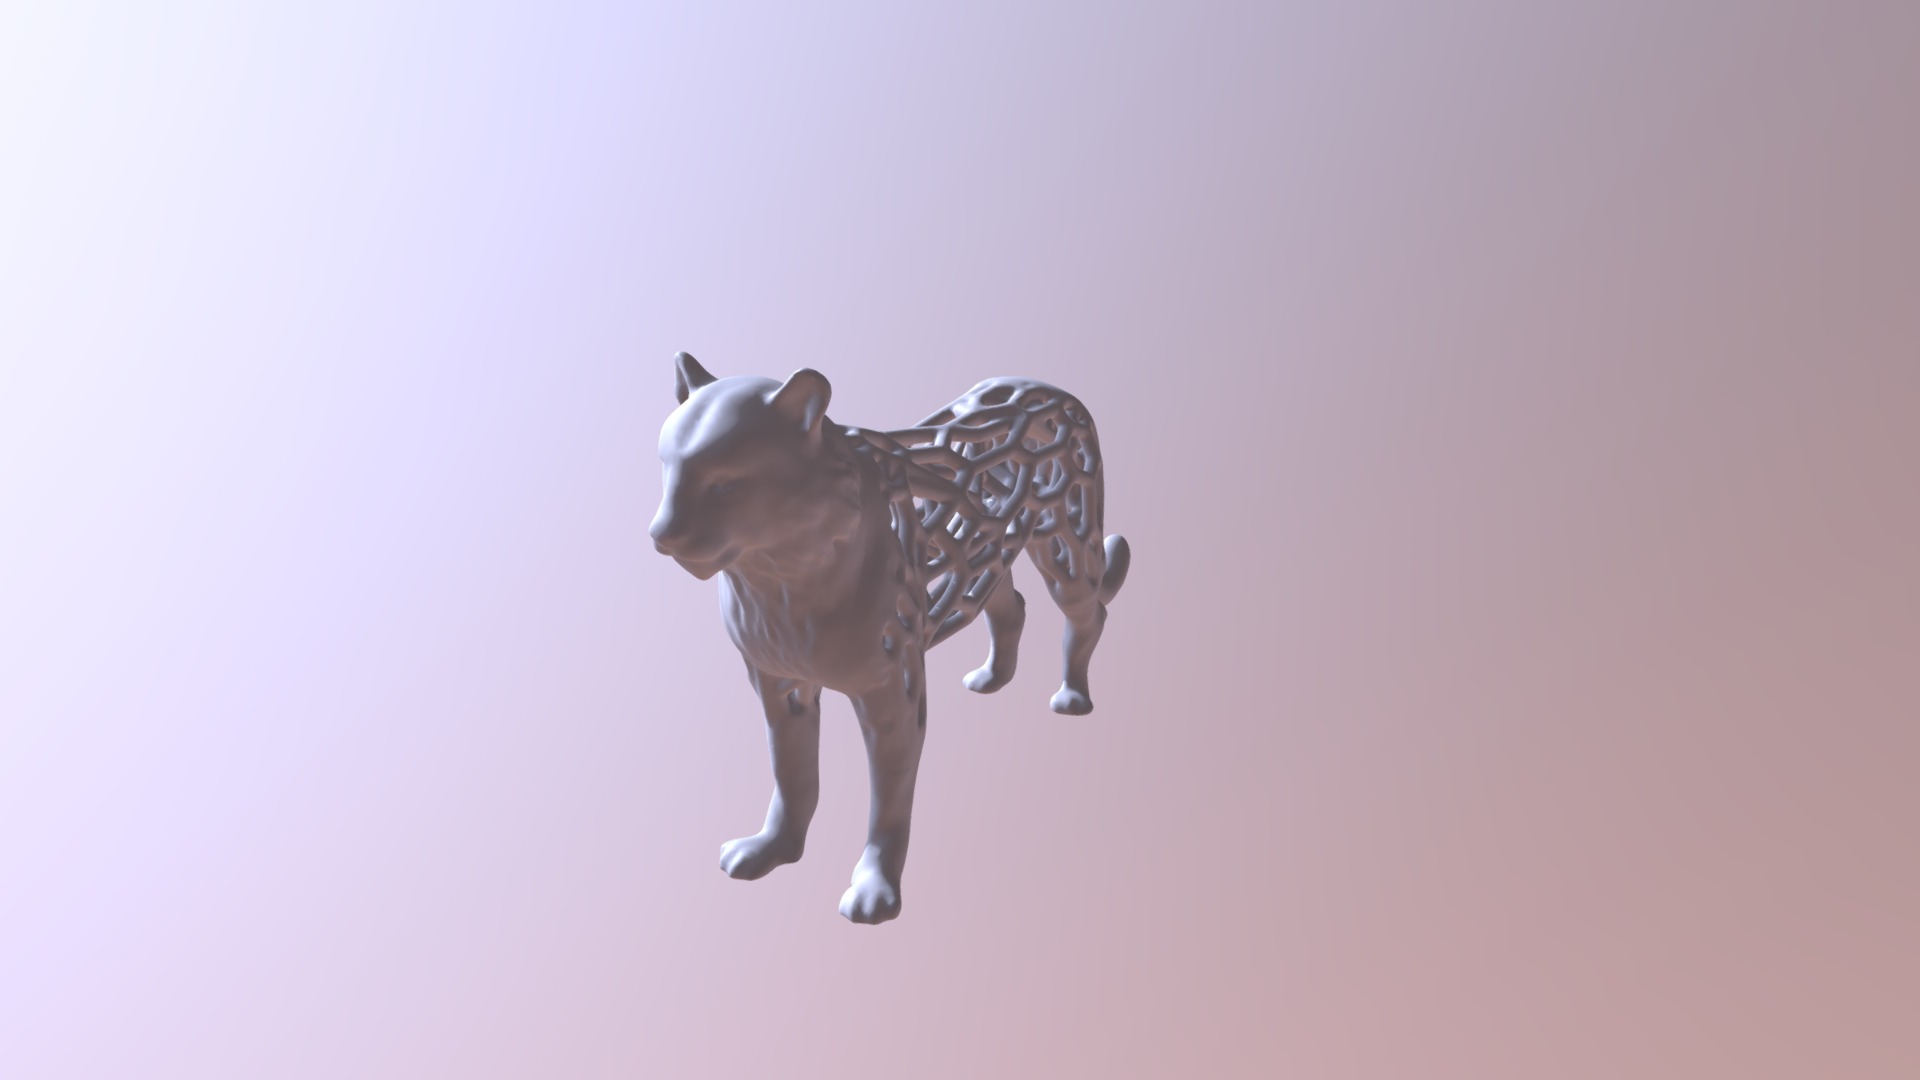 3D model Tiger-voronoi - This is a 3D model of the Tiger-voronoi. The 3D model is about a small dog statue.